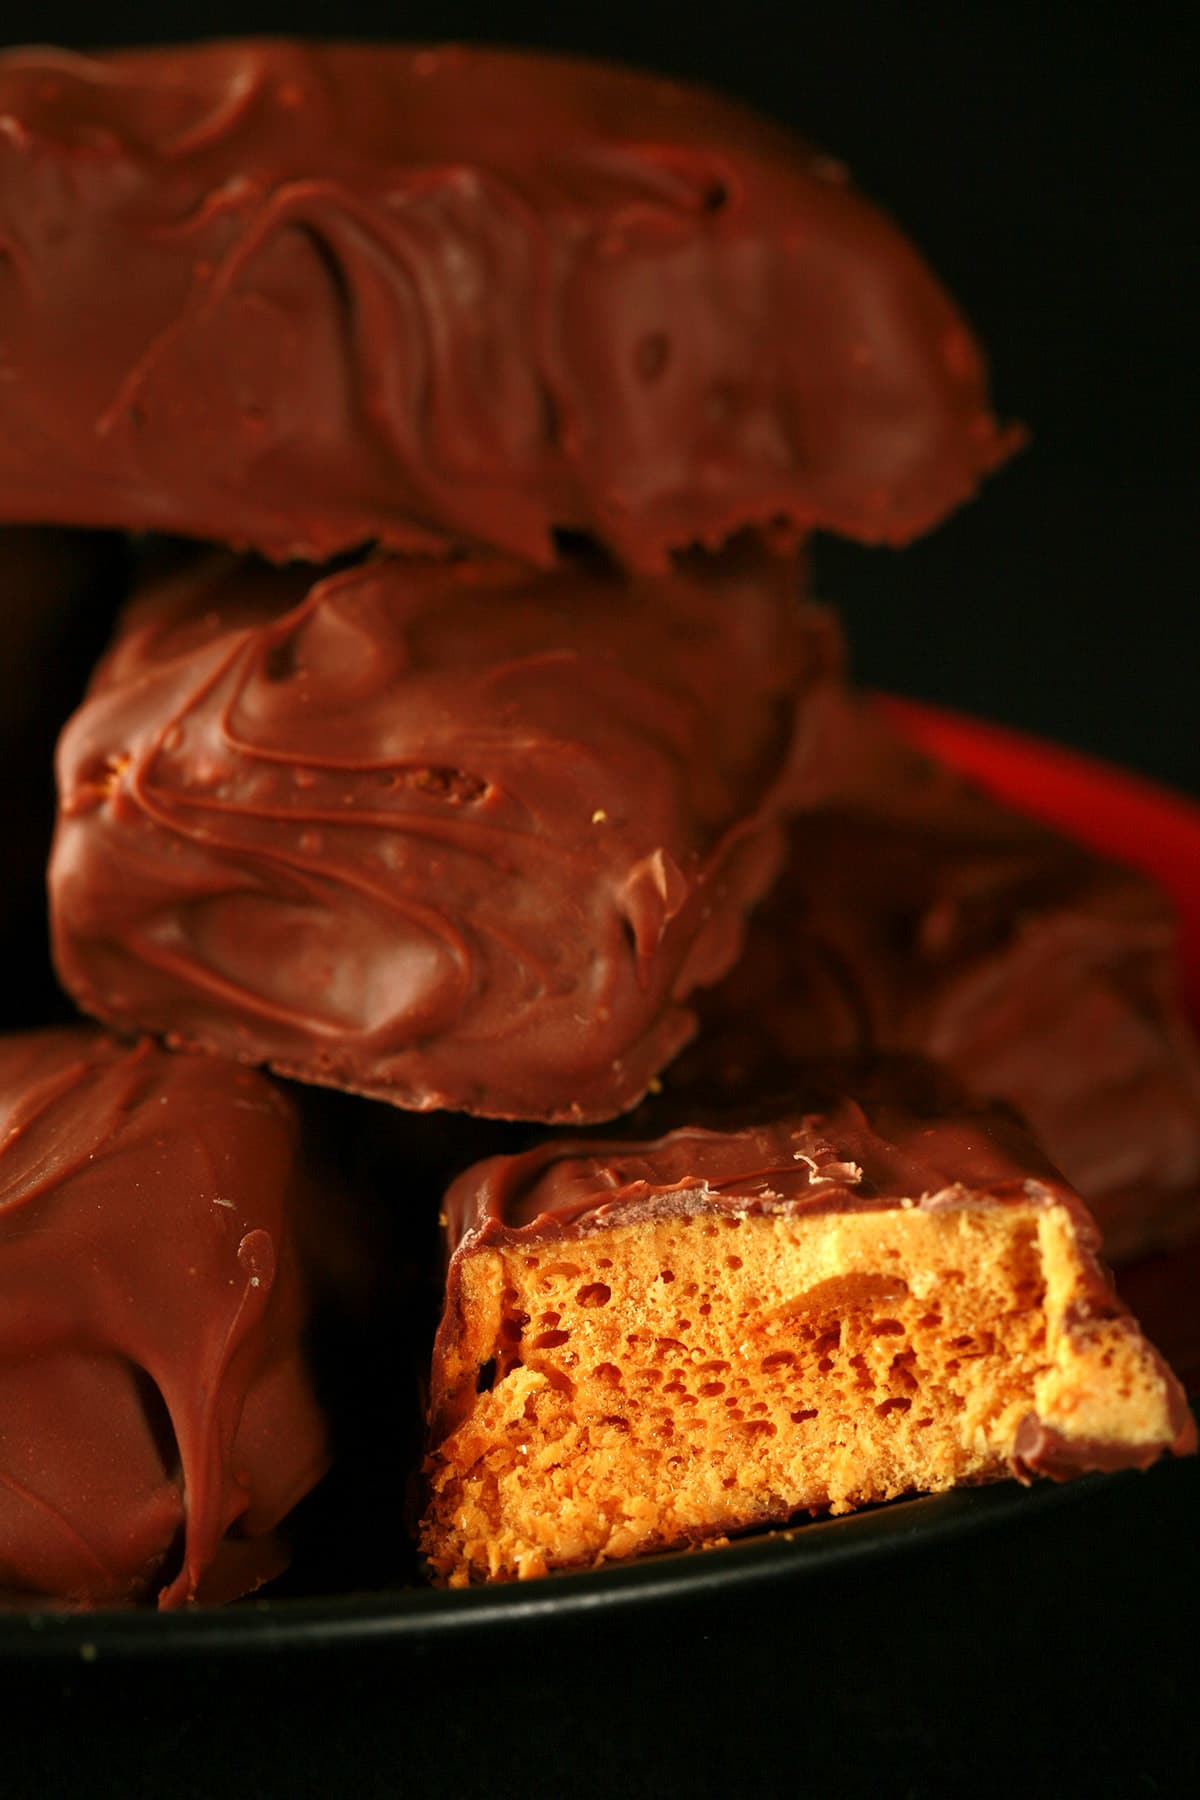 A small red plate is piled high with homemade crunchie bars. One is broken in half to reveal the sponge toffee inside.